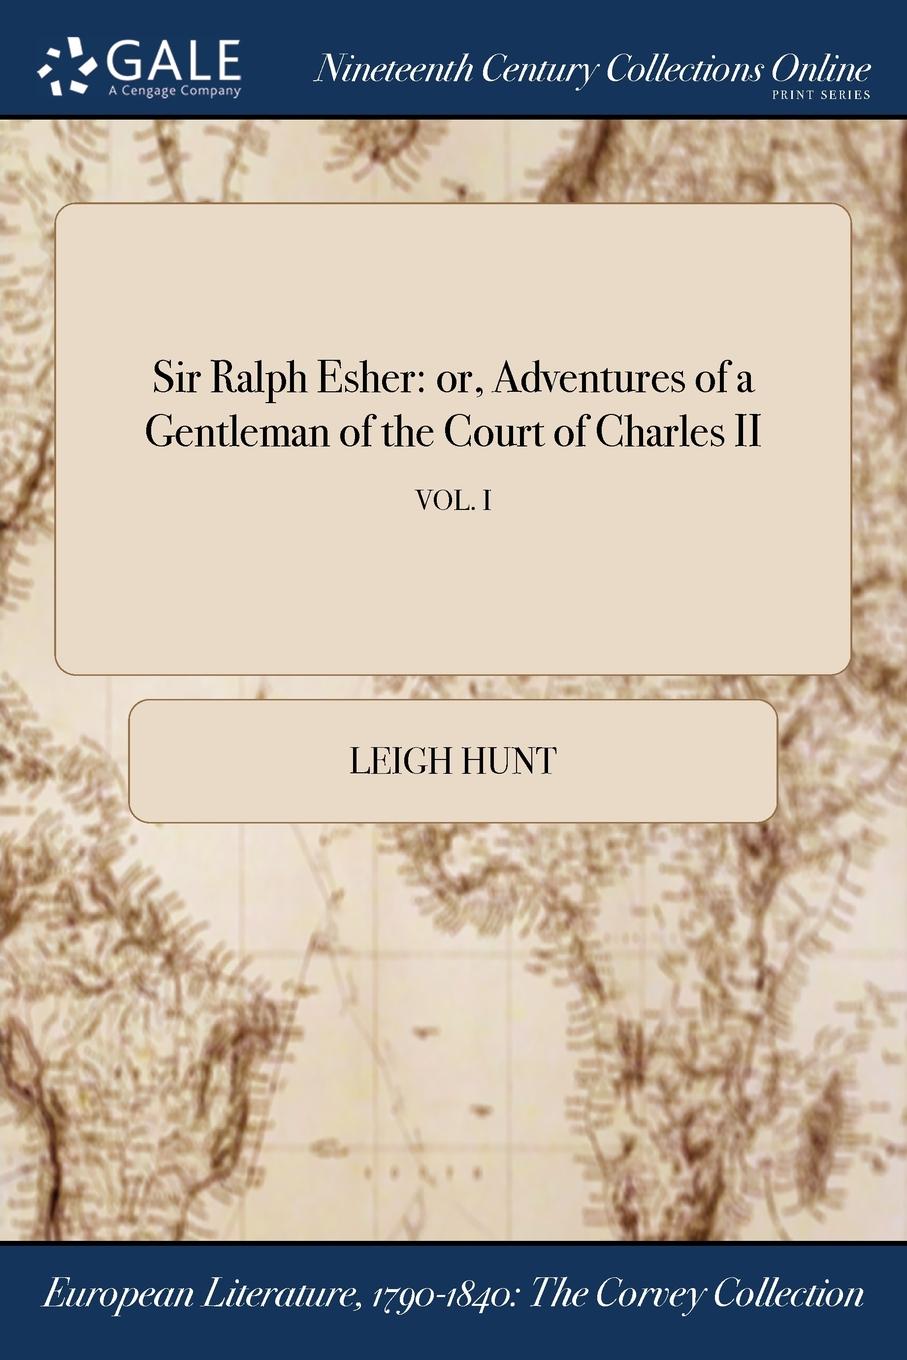 Leigh Hunt Sir Ralph Esher. or, Adventures of a Gentleman of the Court of Charles II; VOL. I